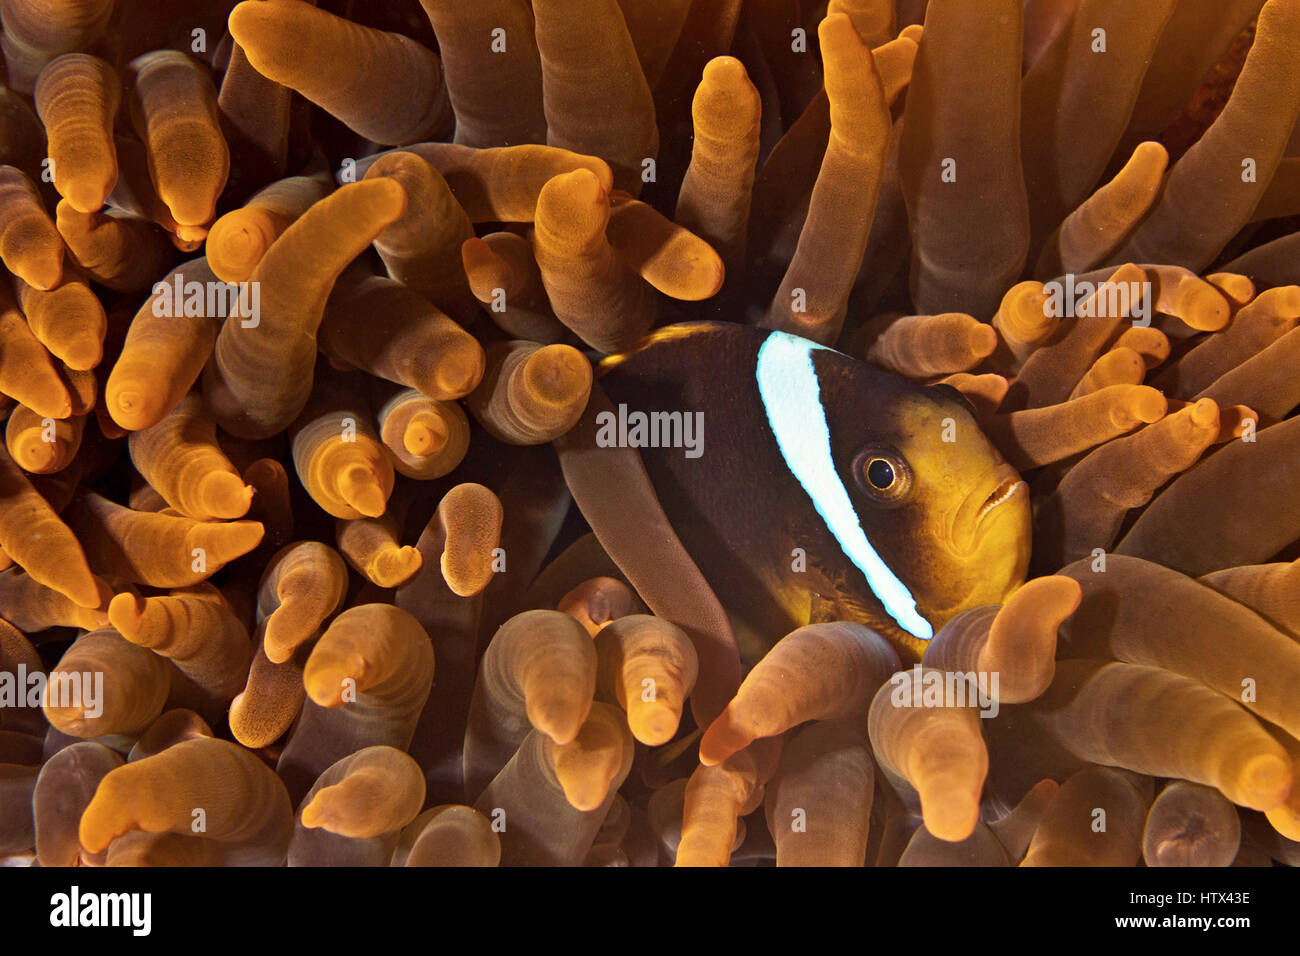 Red Sea clownfish (Amphiprion bicinctus) in a sea anemone, Red Sea, Egypt Stock Photo